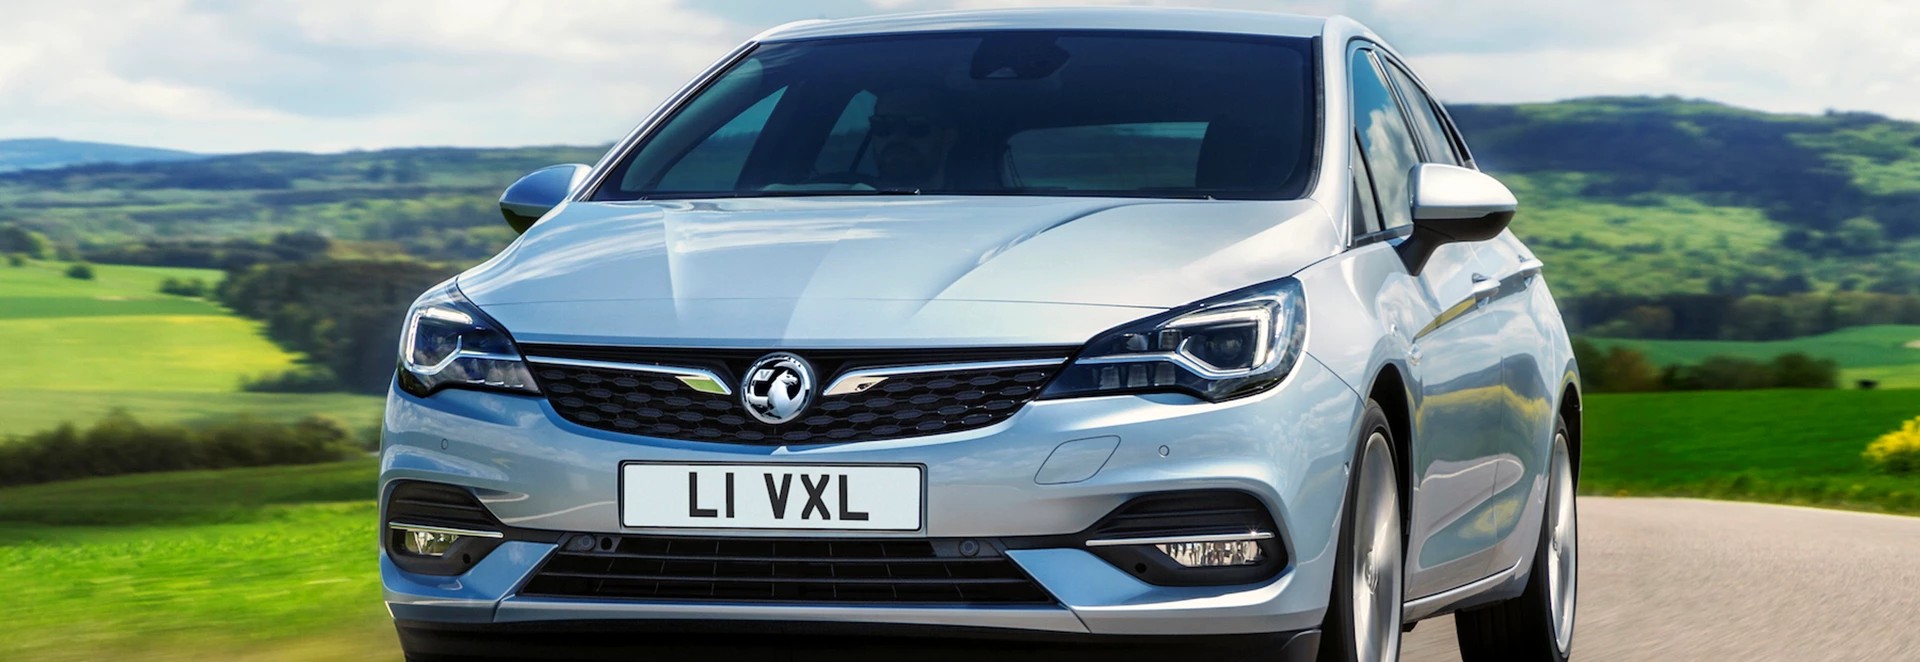 Facelifted Vauxhall Astra revealed with major tech and engine updates 